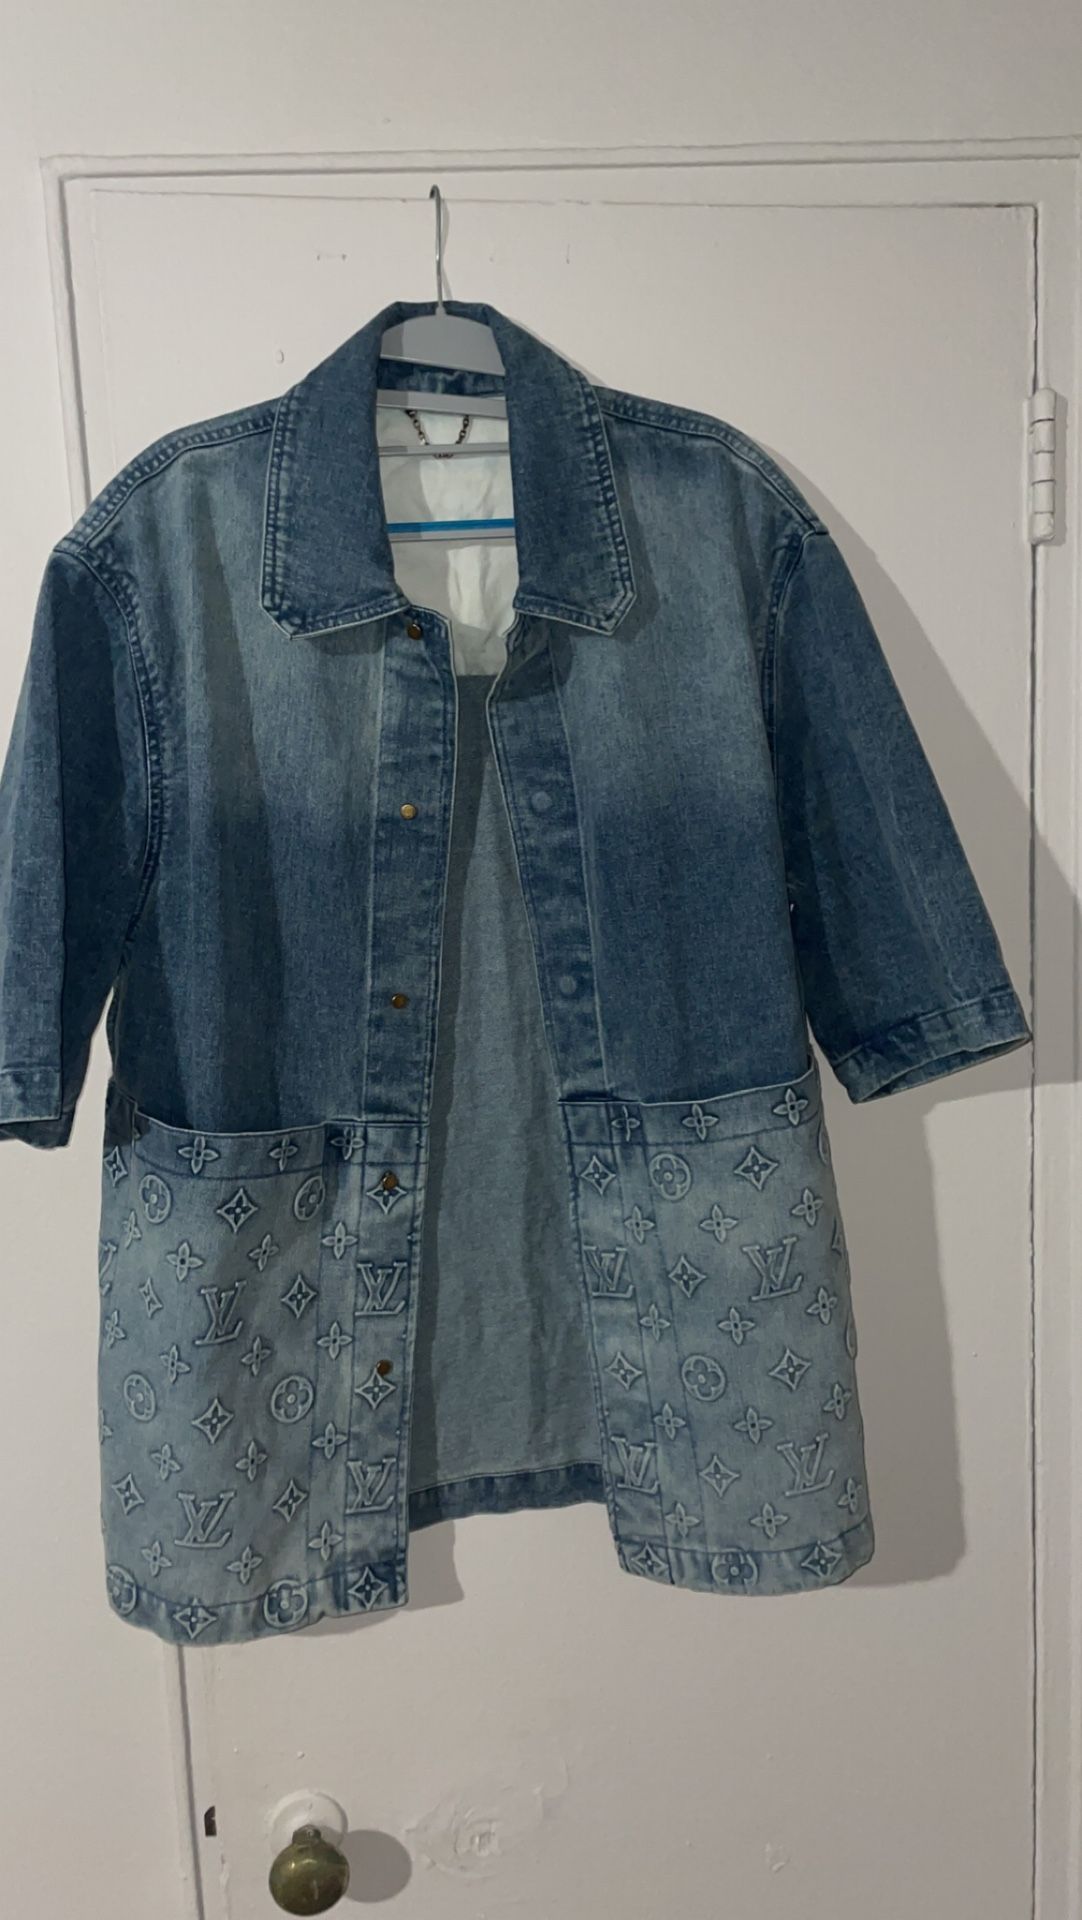 Louis Vuitton Short-sleeved Denim Workwear Shirt 1ABLDH, Blue, Please Contact Seller for Other Sizes